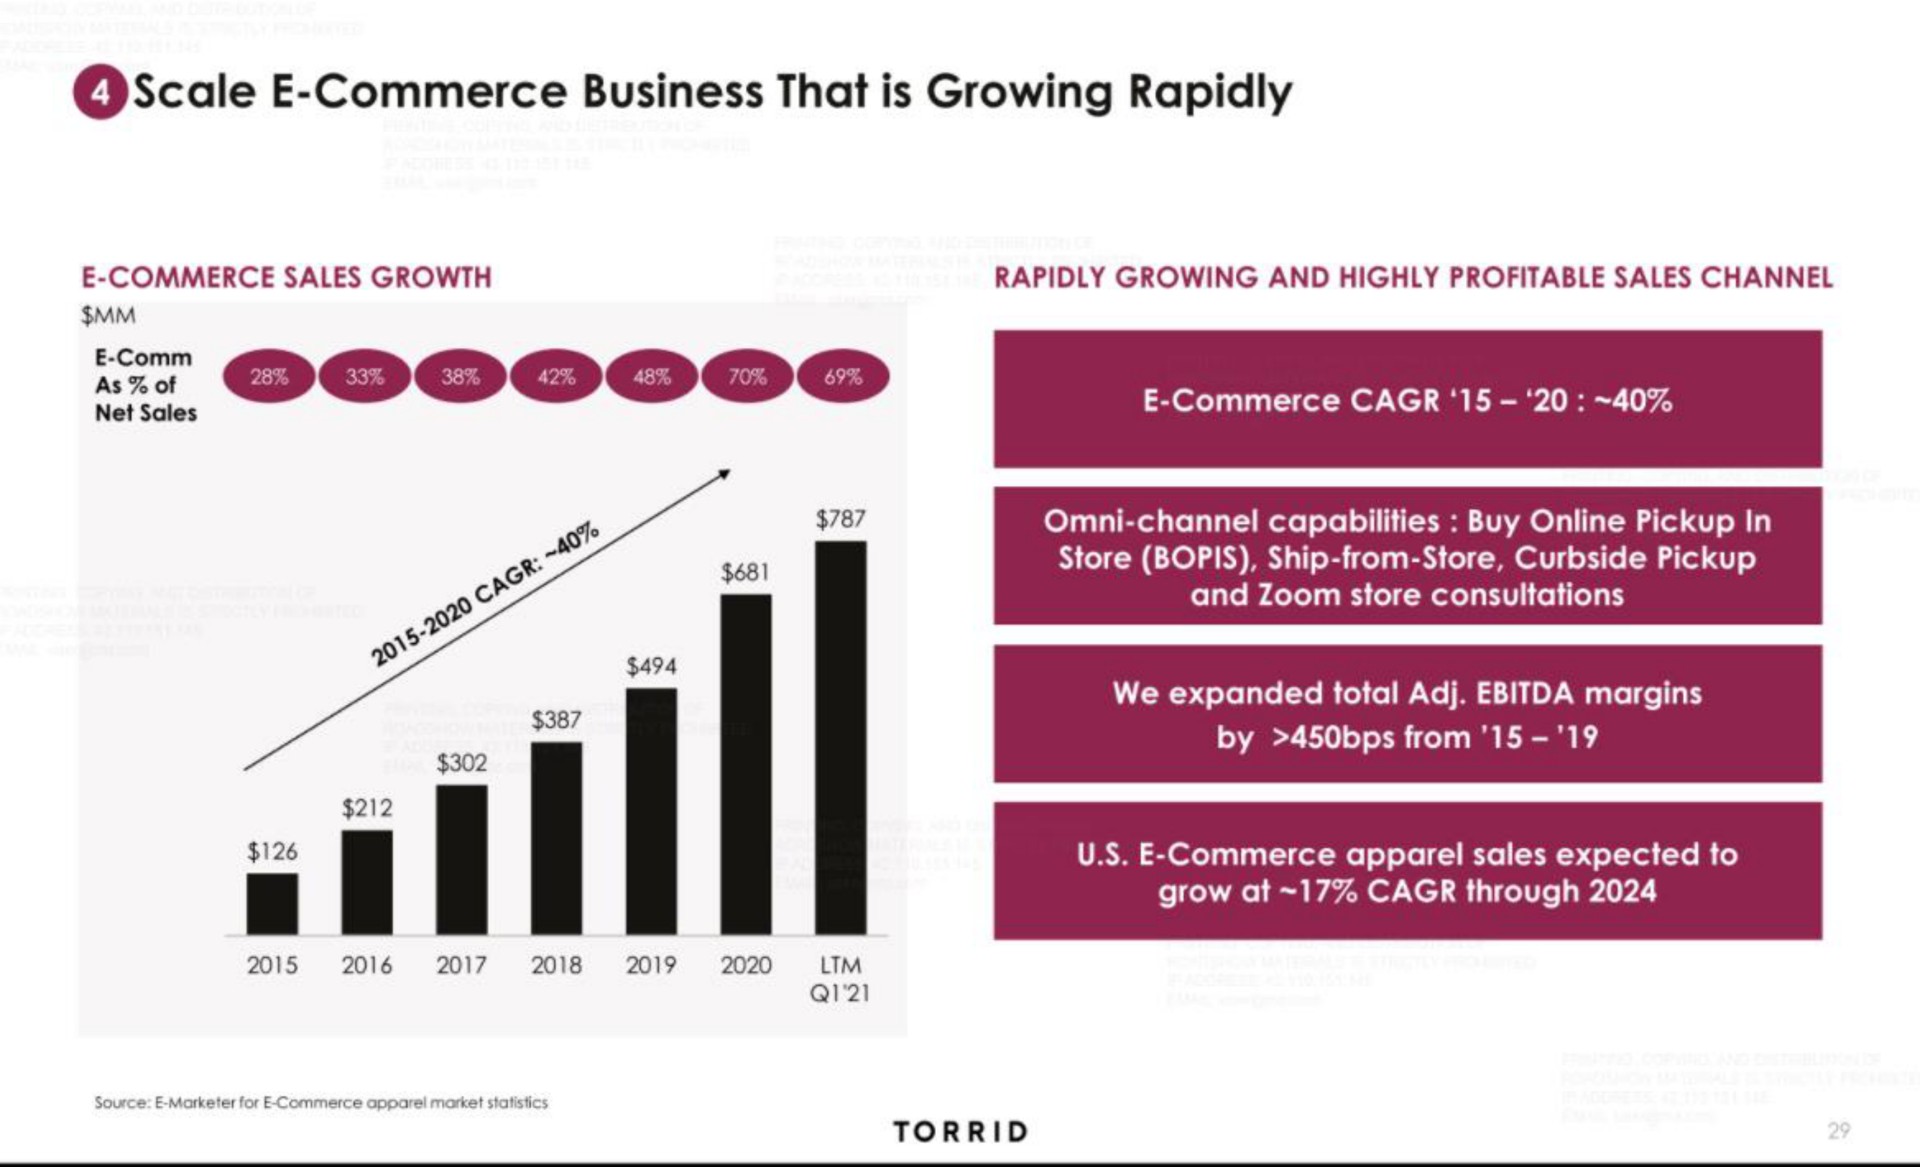 commerce business that is growing rapidly | Torrid